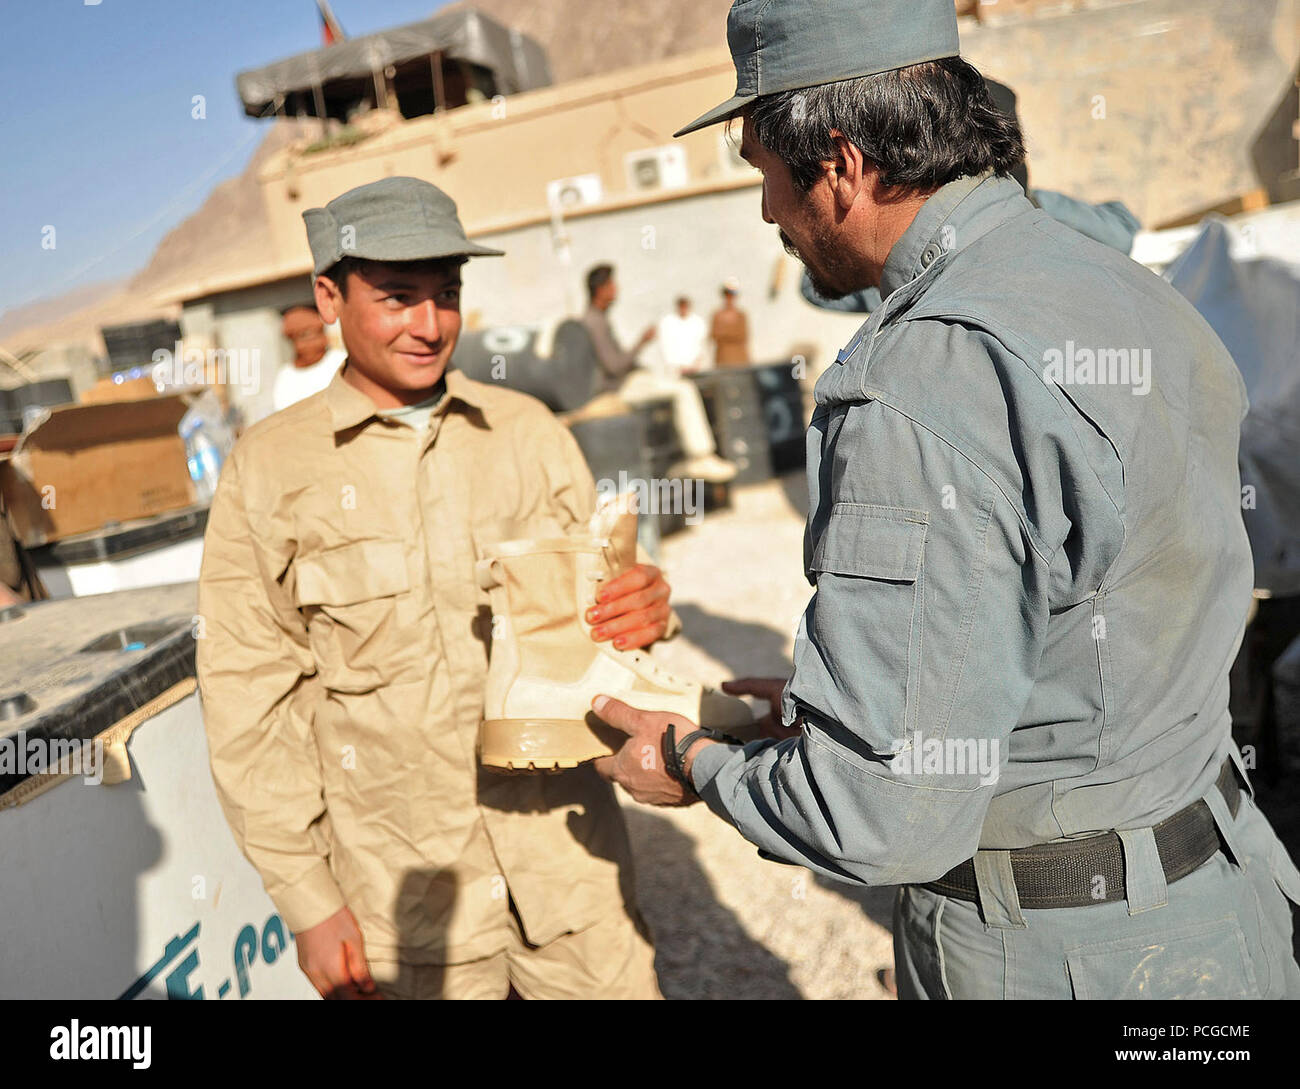 An Afghan Local Police recruit receives his boots from an instructor in Gizab district, Uruzgan province, Afghanistan, Dec 28. The ALP is a defensive, community-oriented force that brings security and stability to rural areas of Afghanistan. Stock Photo